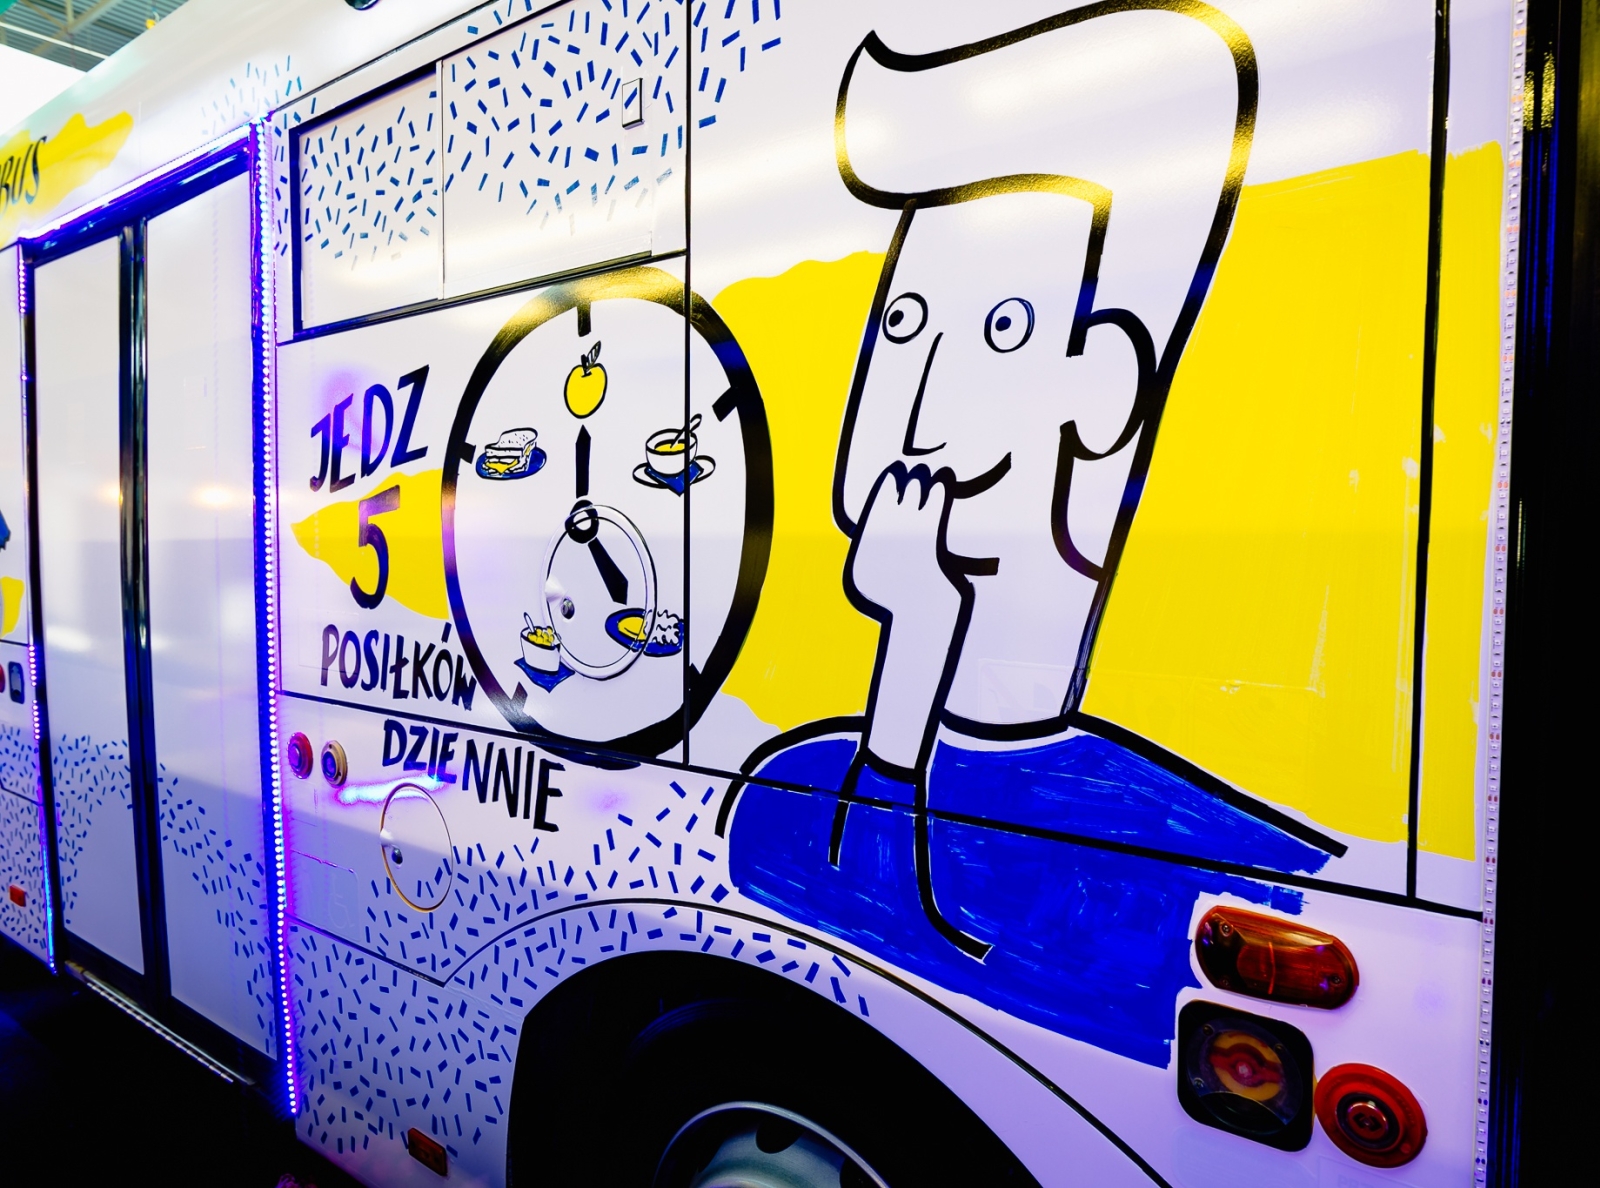 Live drawing on a bus live drawing handmade typography illustrations design drawing illustration art dinksy graphic